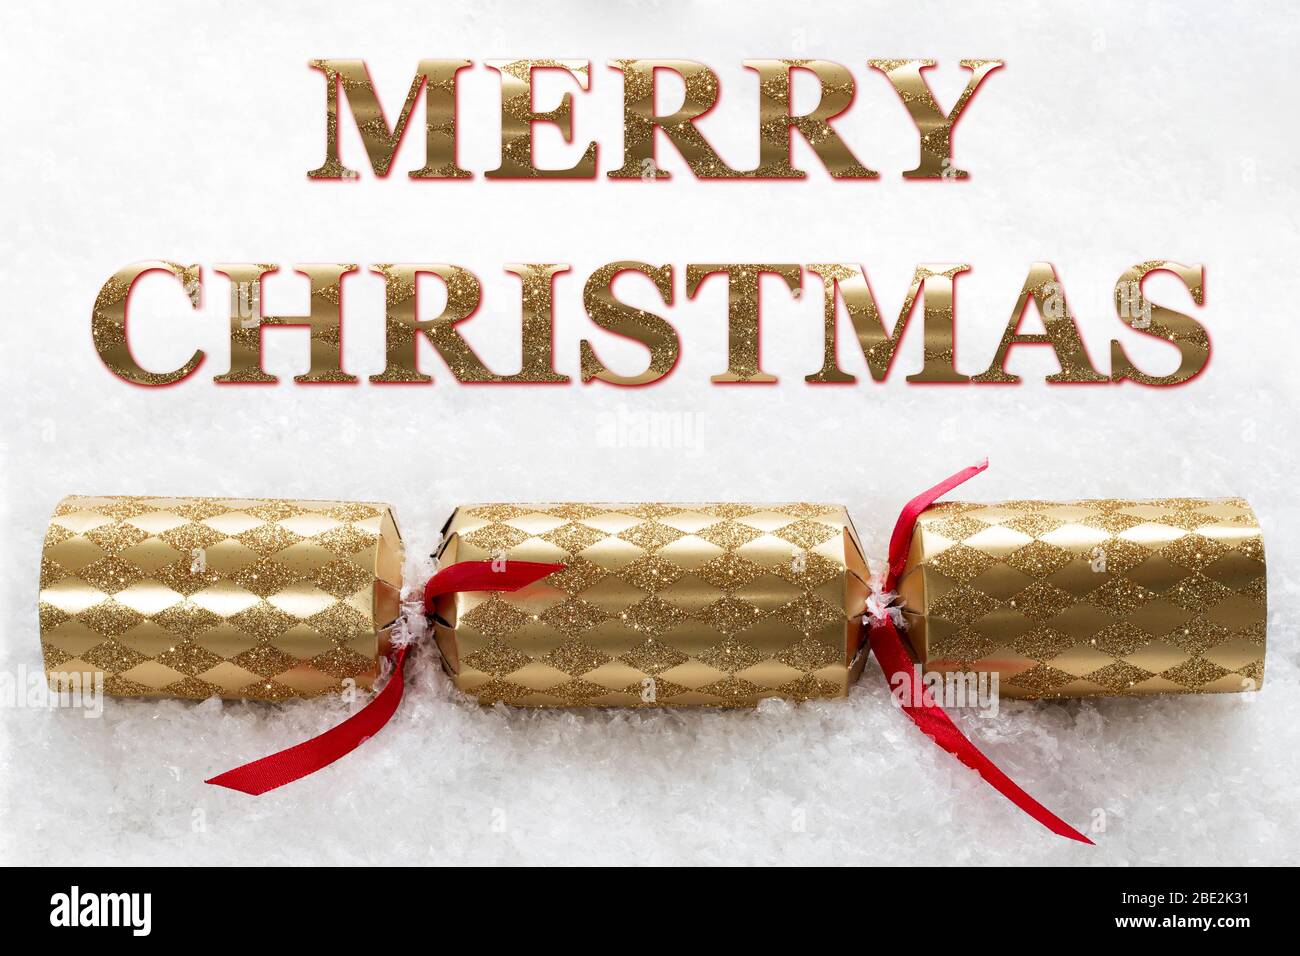 Merry Christmas message with a gold Christmas cracker and a snow background Stock Photo